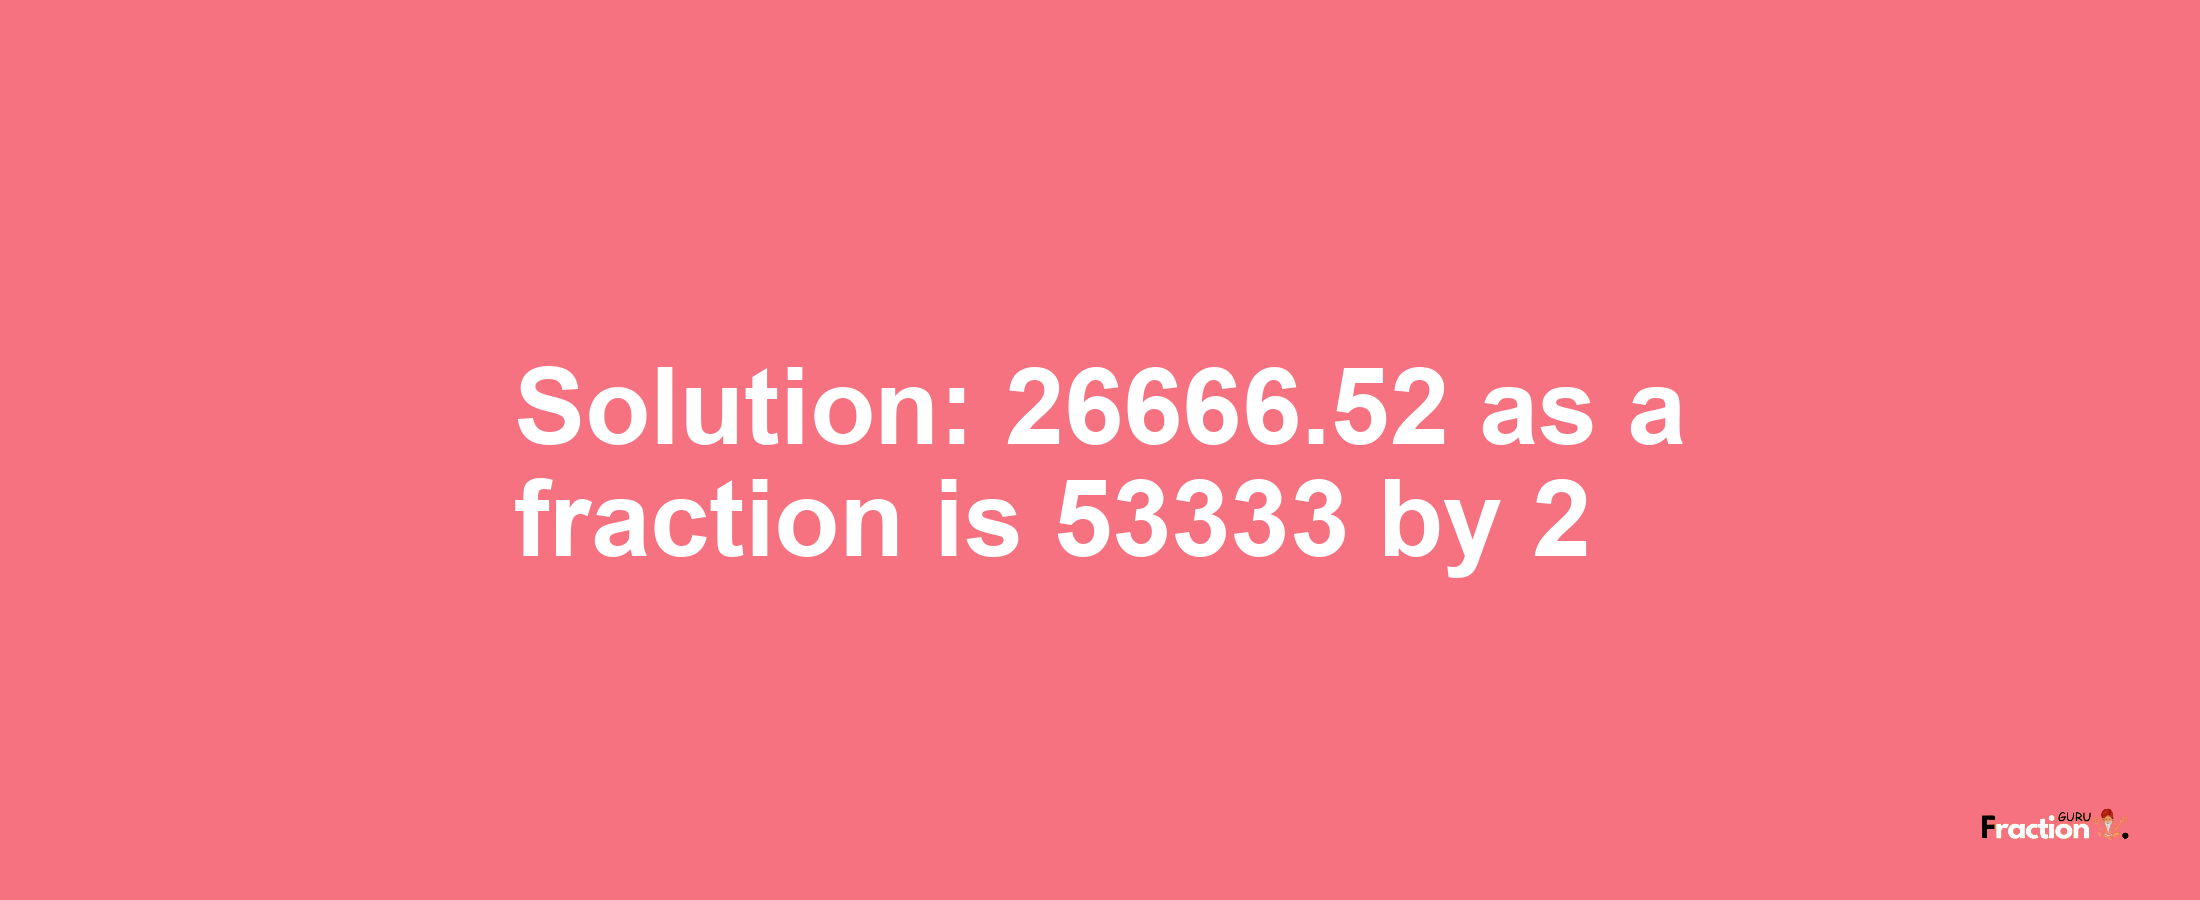 Solution:26666.52 as a fraction is 53333/2